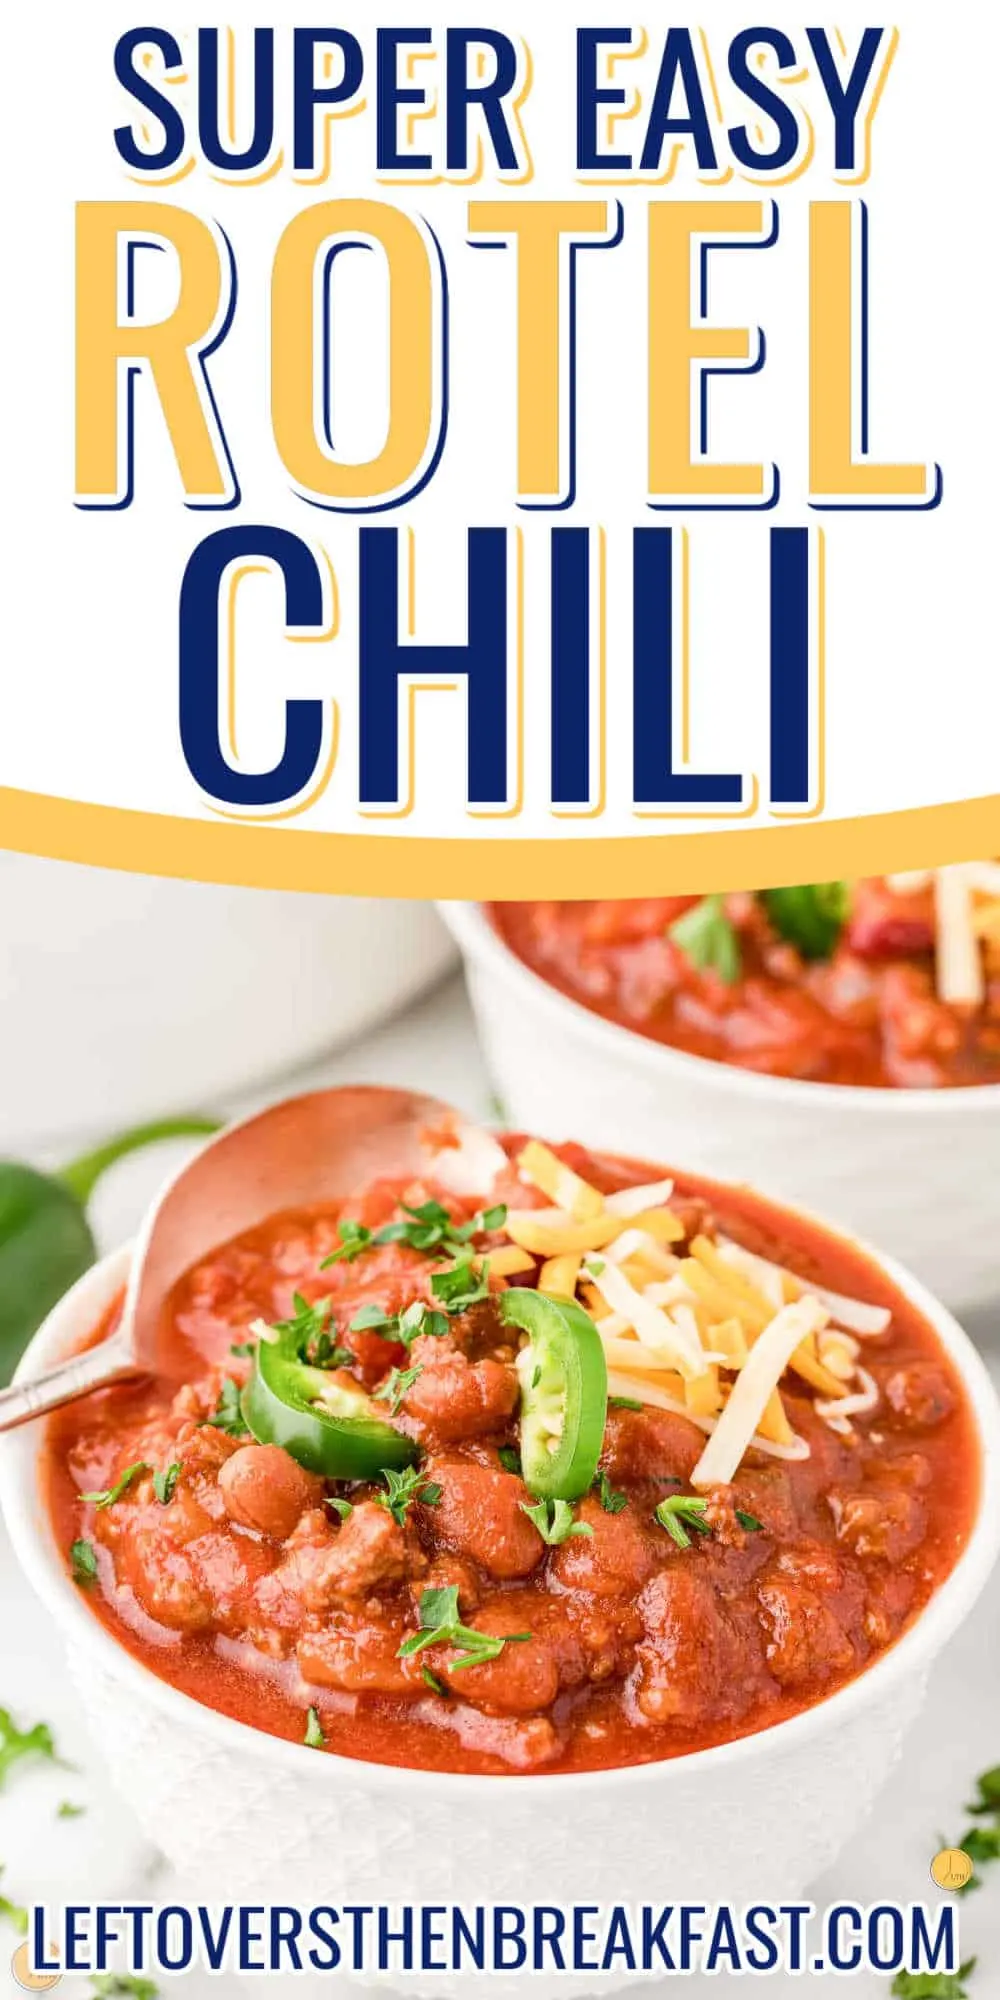 bowl of chili with spoon and white banner with text "Super easy ro tel chili"